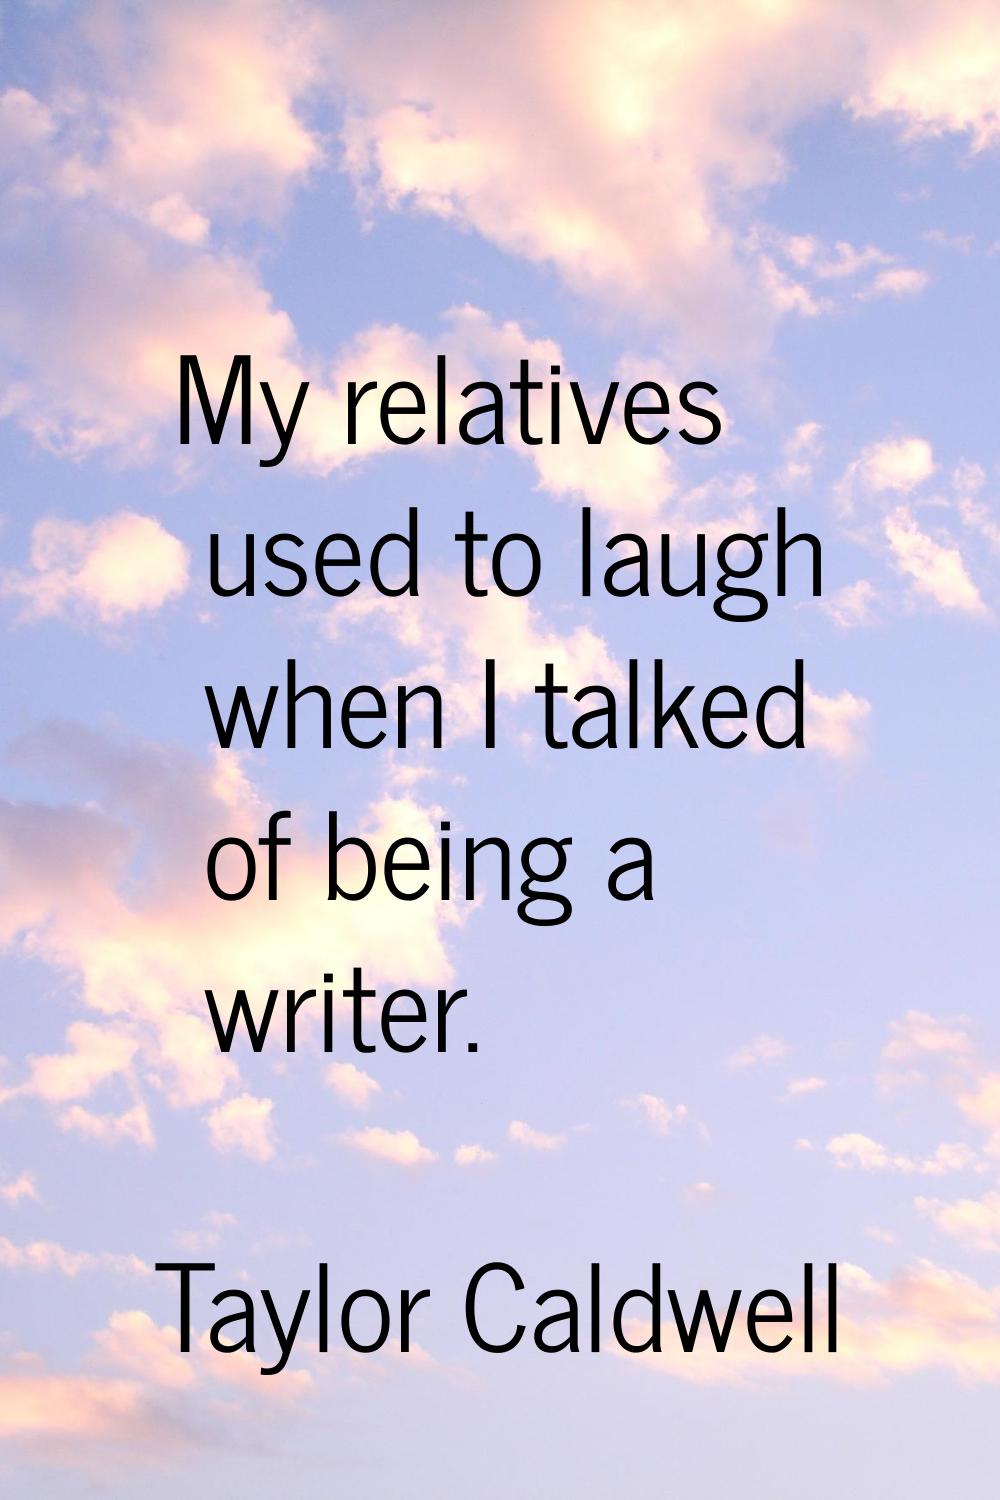 My relatives used to laugh when I talked of being a writer.